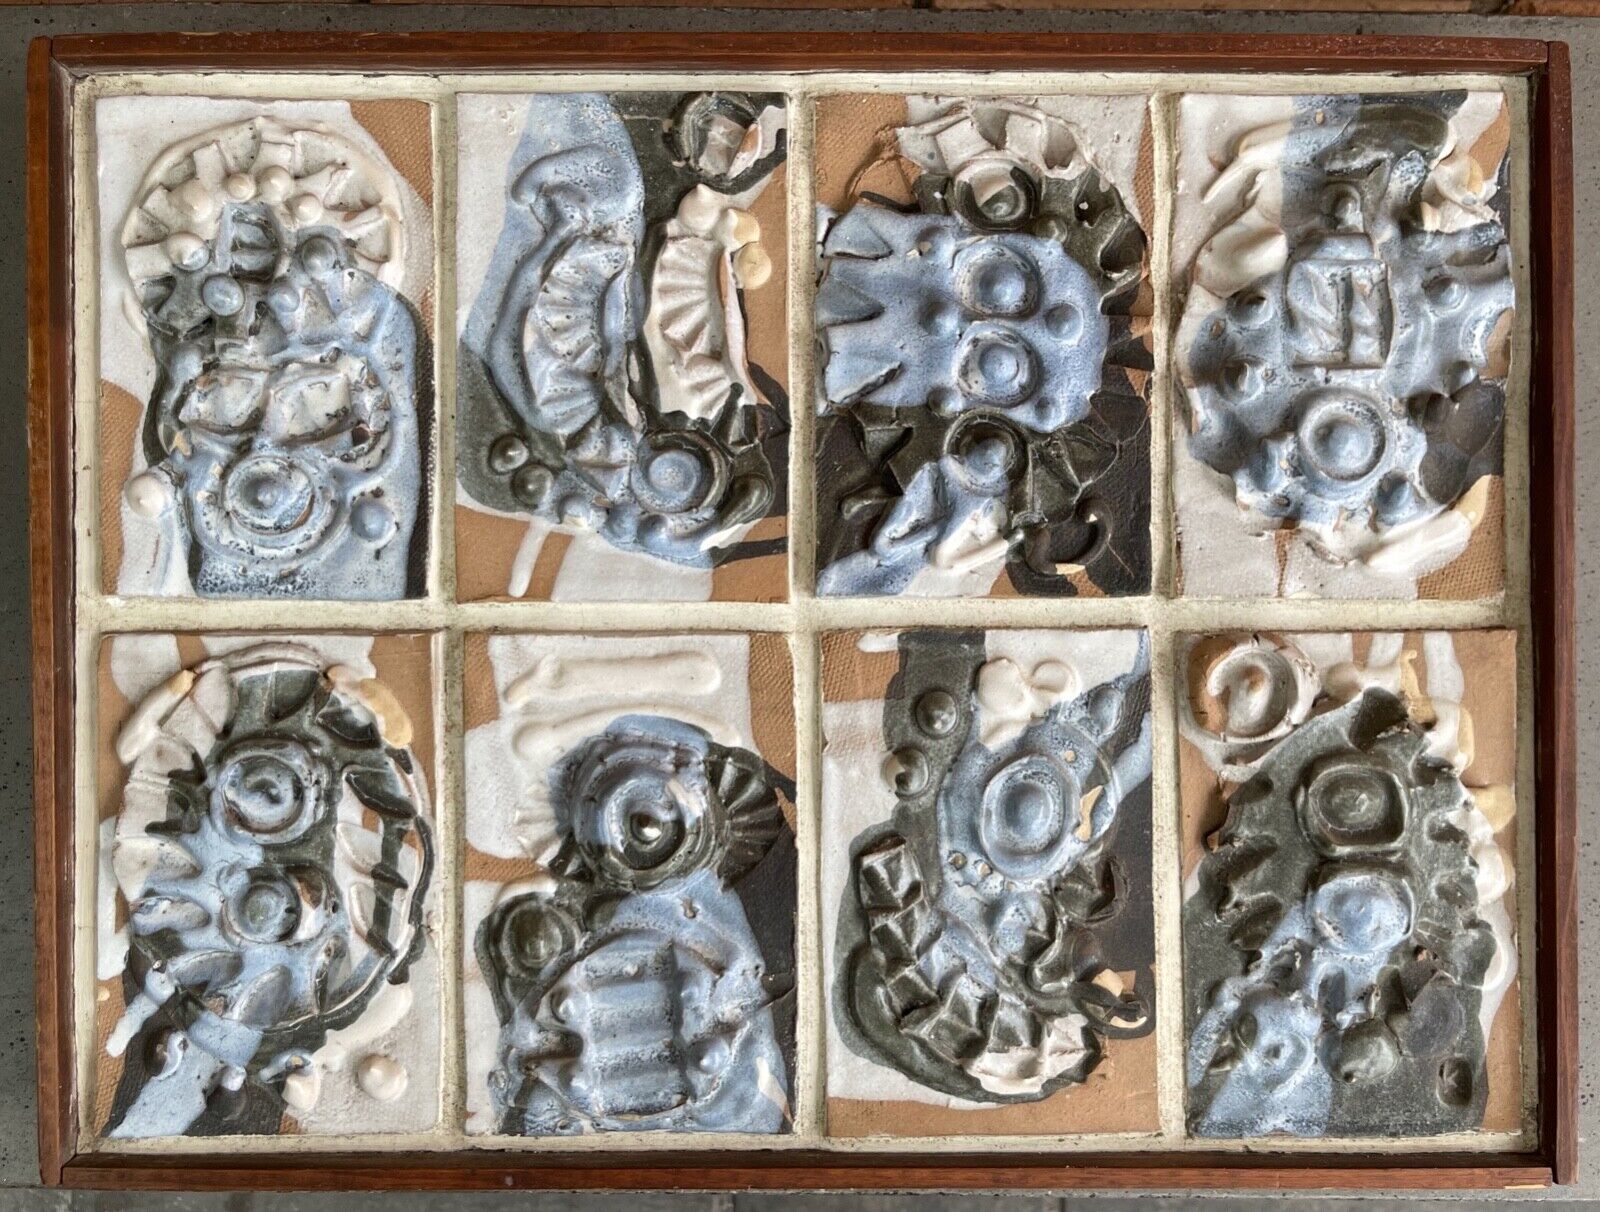 Vintage 60s Abstract Ceramic Stoneware Tile Plaque Wall Hanging Mid Century Mod